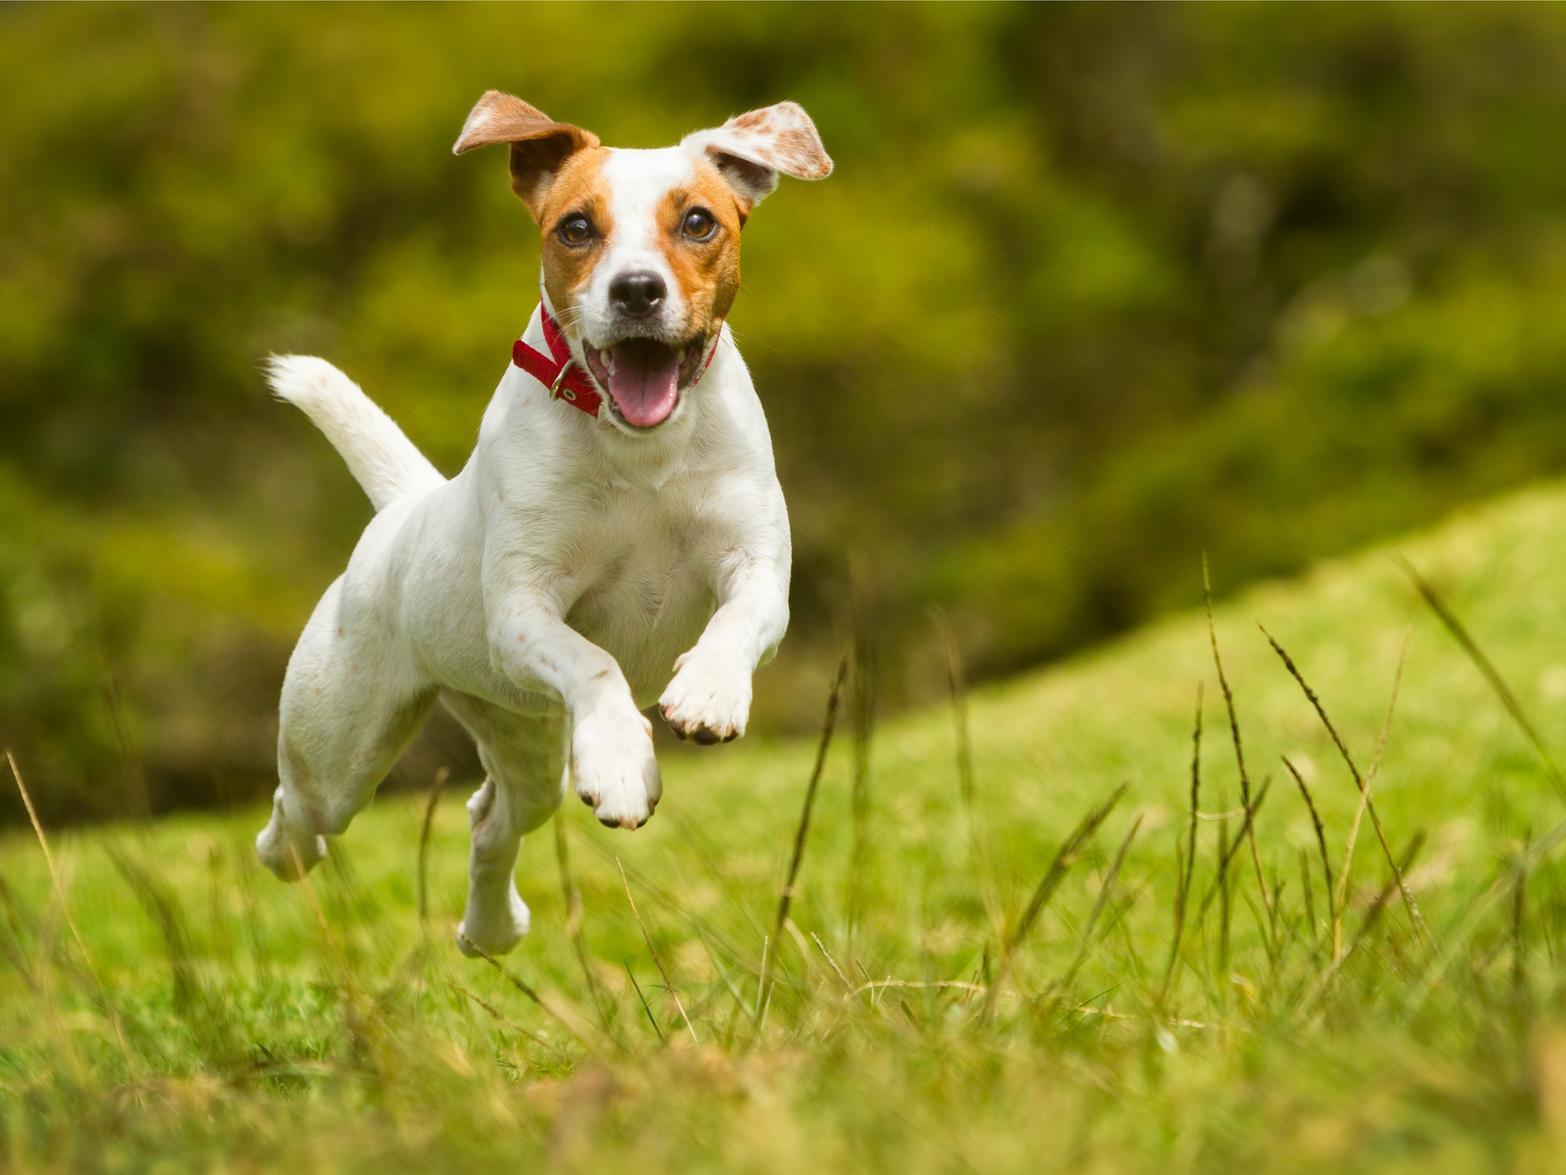 Jack Russells come at the top of the list for dog breeds most likely to misbehave at Christmas